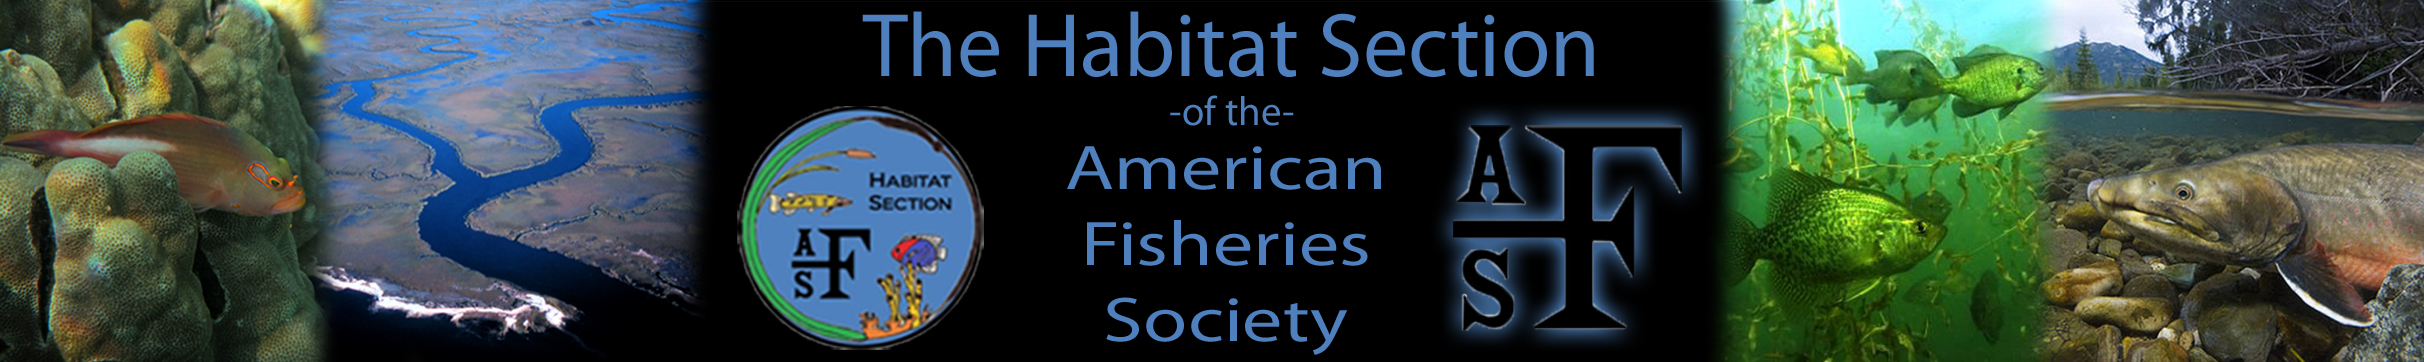 Fish Habitat Section of the American Fisheries Society